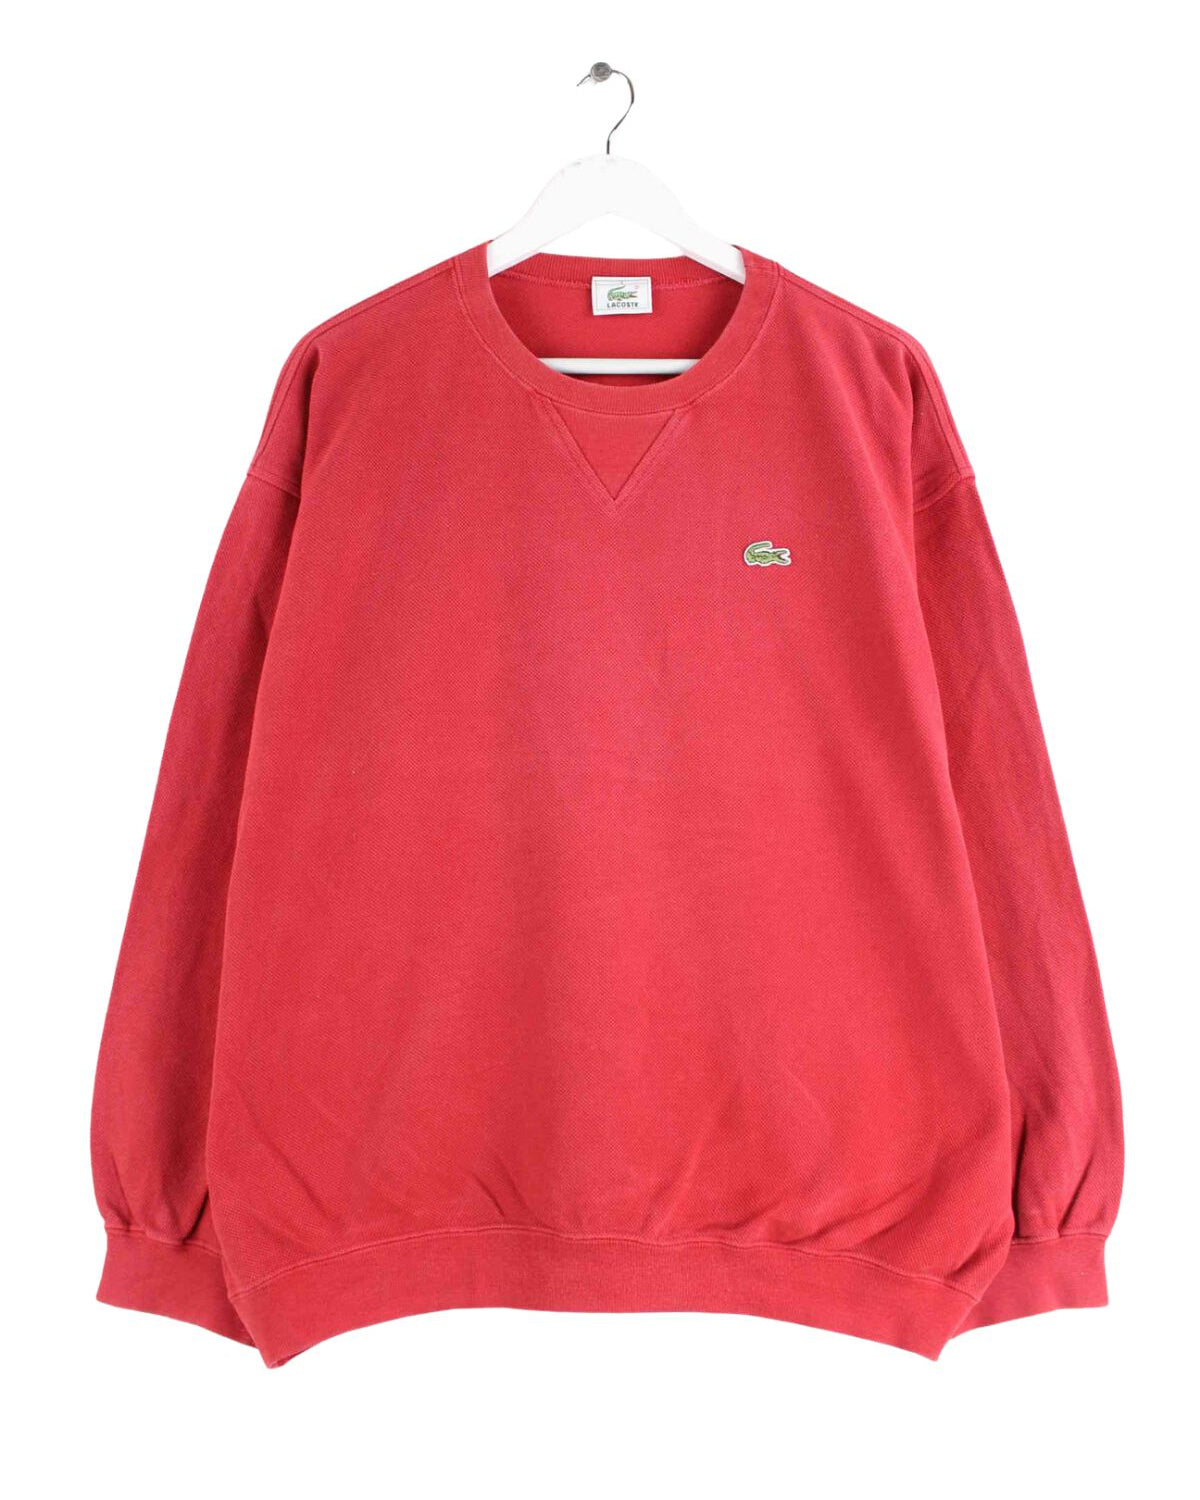 Lacoste 90s Vintage Sweater Rot L (front image)